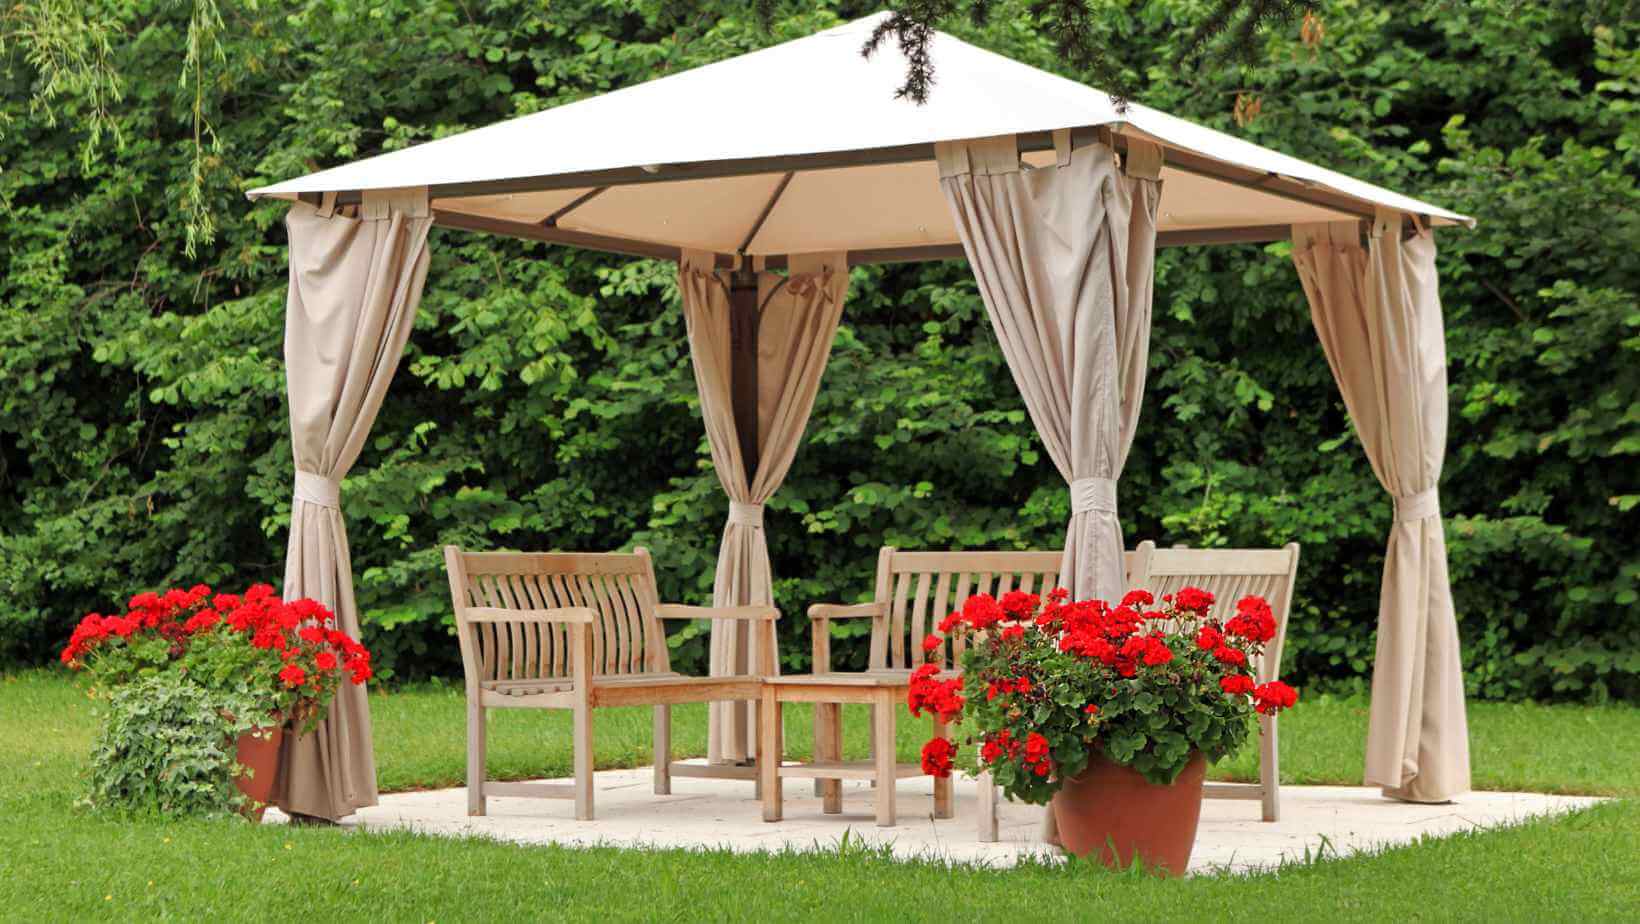 How To Anchor A Gazebo On Grass